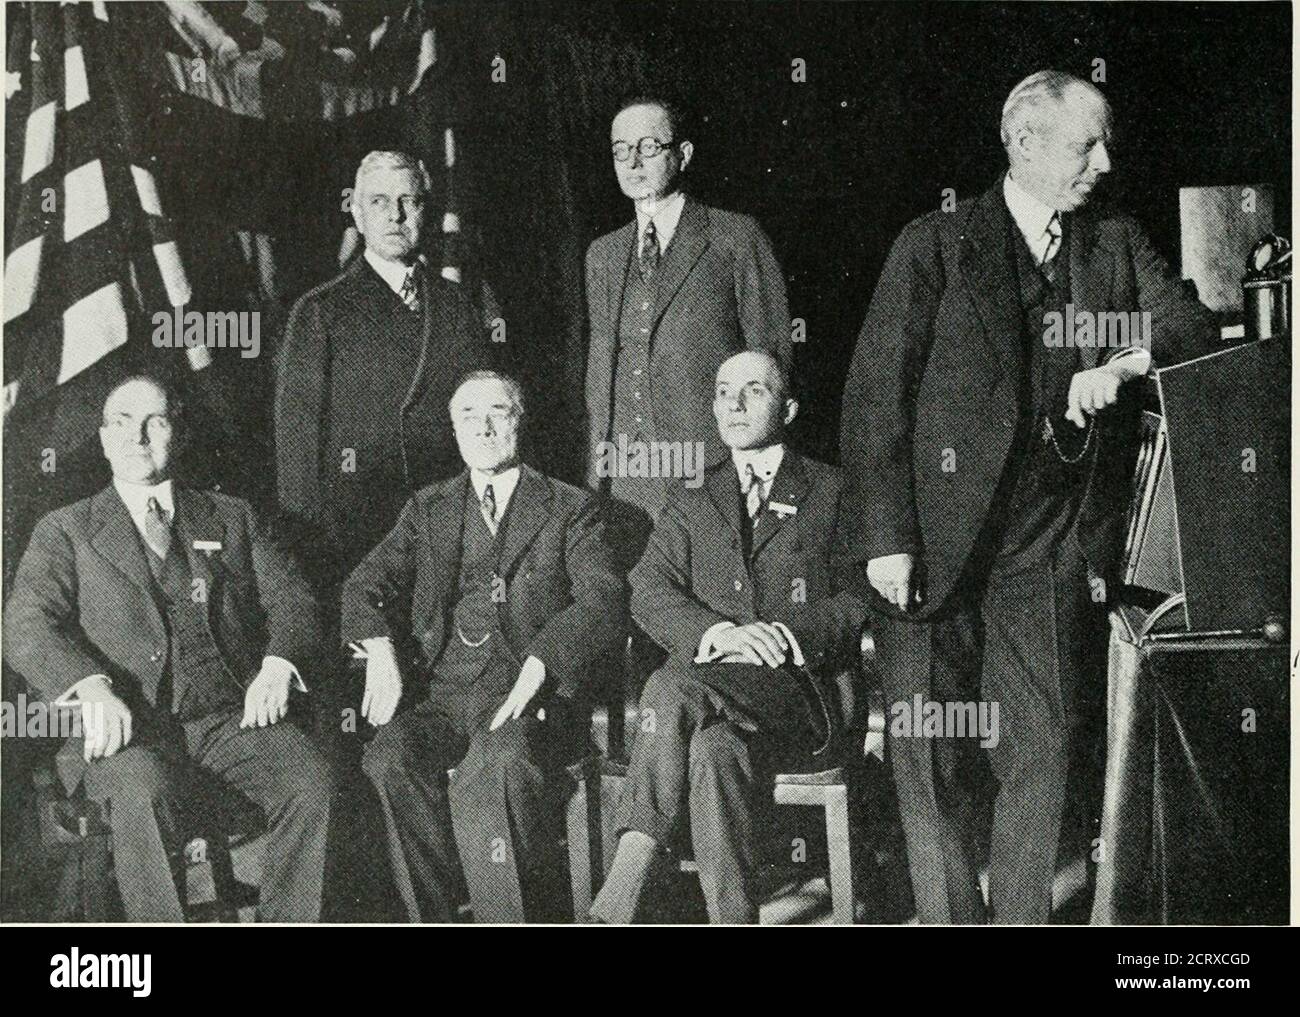 . Bell telephone magazine . Q f//r^X Twenty-five Years Ago in the Bell TelephoneQuarterly: Volume VII, Number 2. A. T. ^ T. officials at an A. I. E. E. session in New York on February i6, 1^28,held jointly with a session of the British Institution of Electrical Engineers in Londonby radio telephone. Left to rights seated: H. P. Charlesworth, Plant Engineer; J. J.Carty, Vice President; F. B. jewett. Vice President, President of Bell Laboratories;standing—K. W. Waterson^, Assistant Vice President; 0. B. Blackwell, Trans?nissionDevelopment Engineer; Bancroft Gherardi, Vice President and Chief En Stock Photo